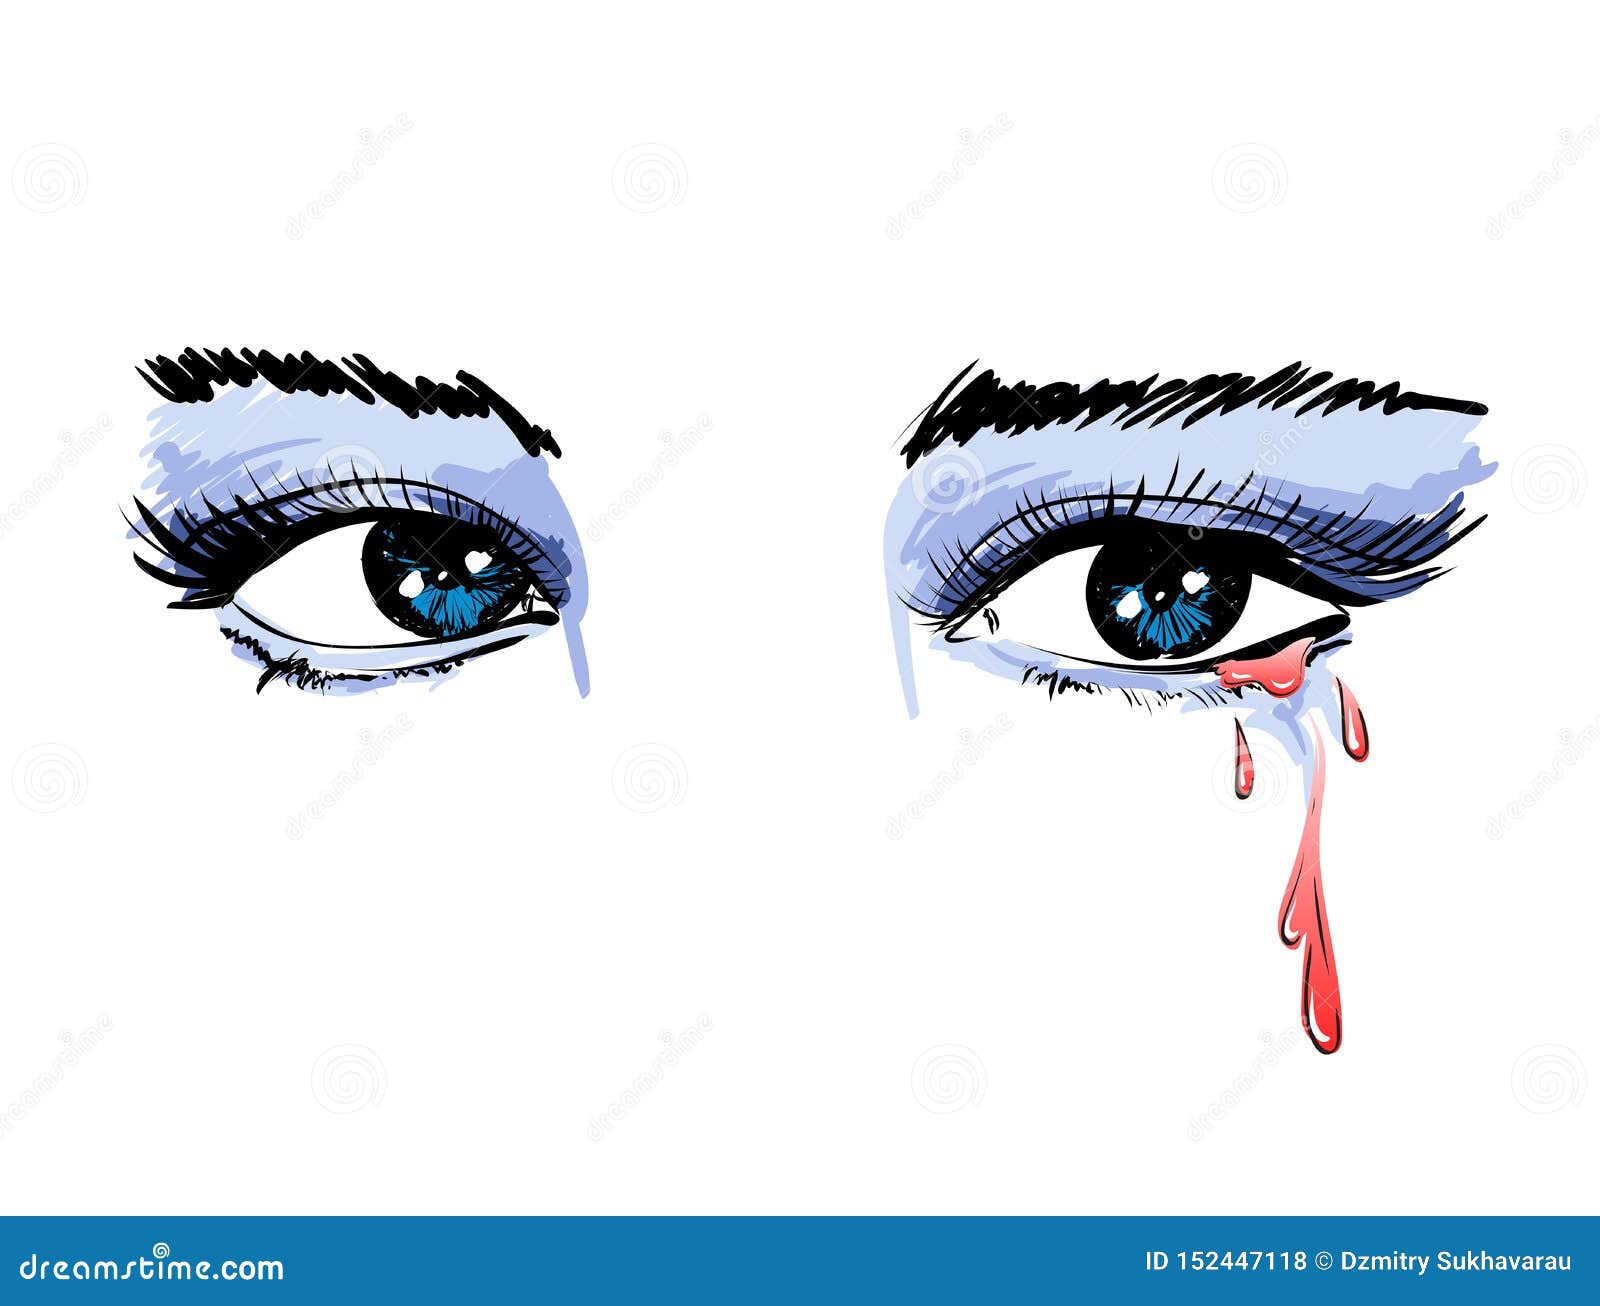 how to draw girl anime eyes crying